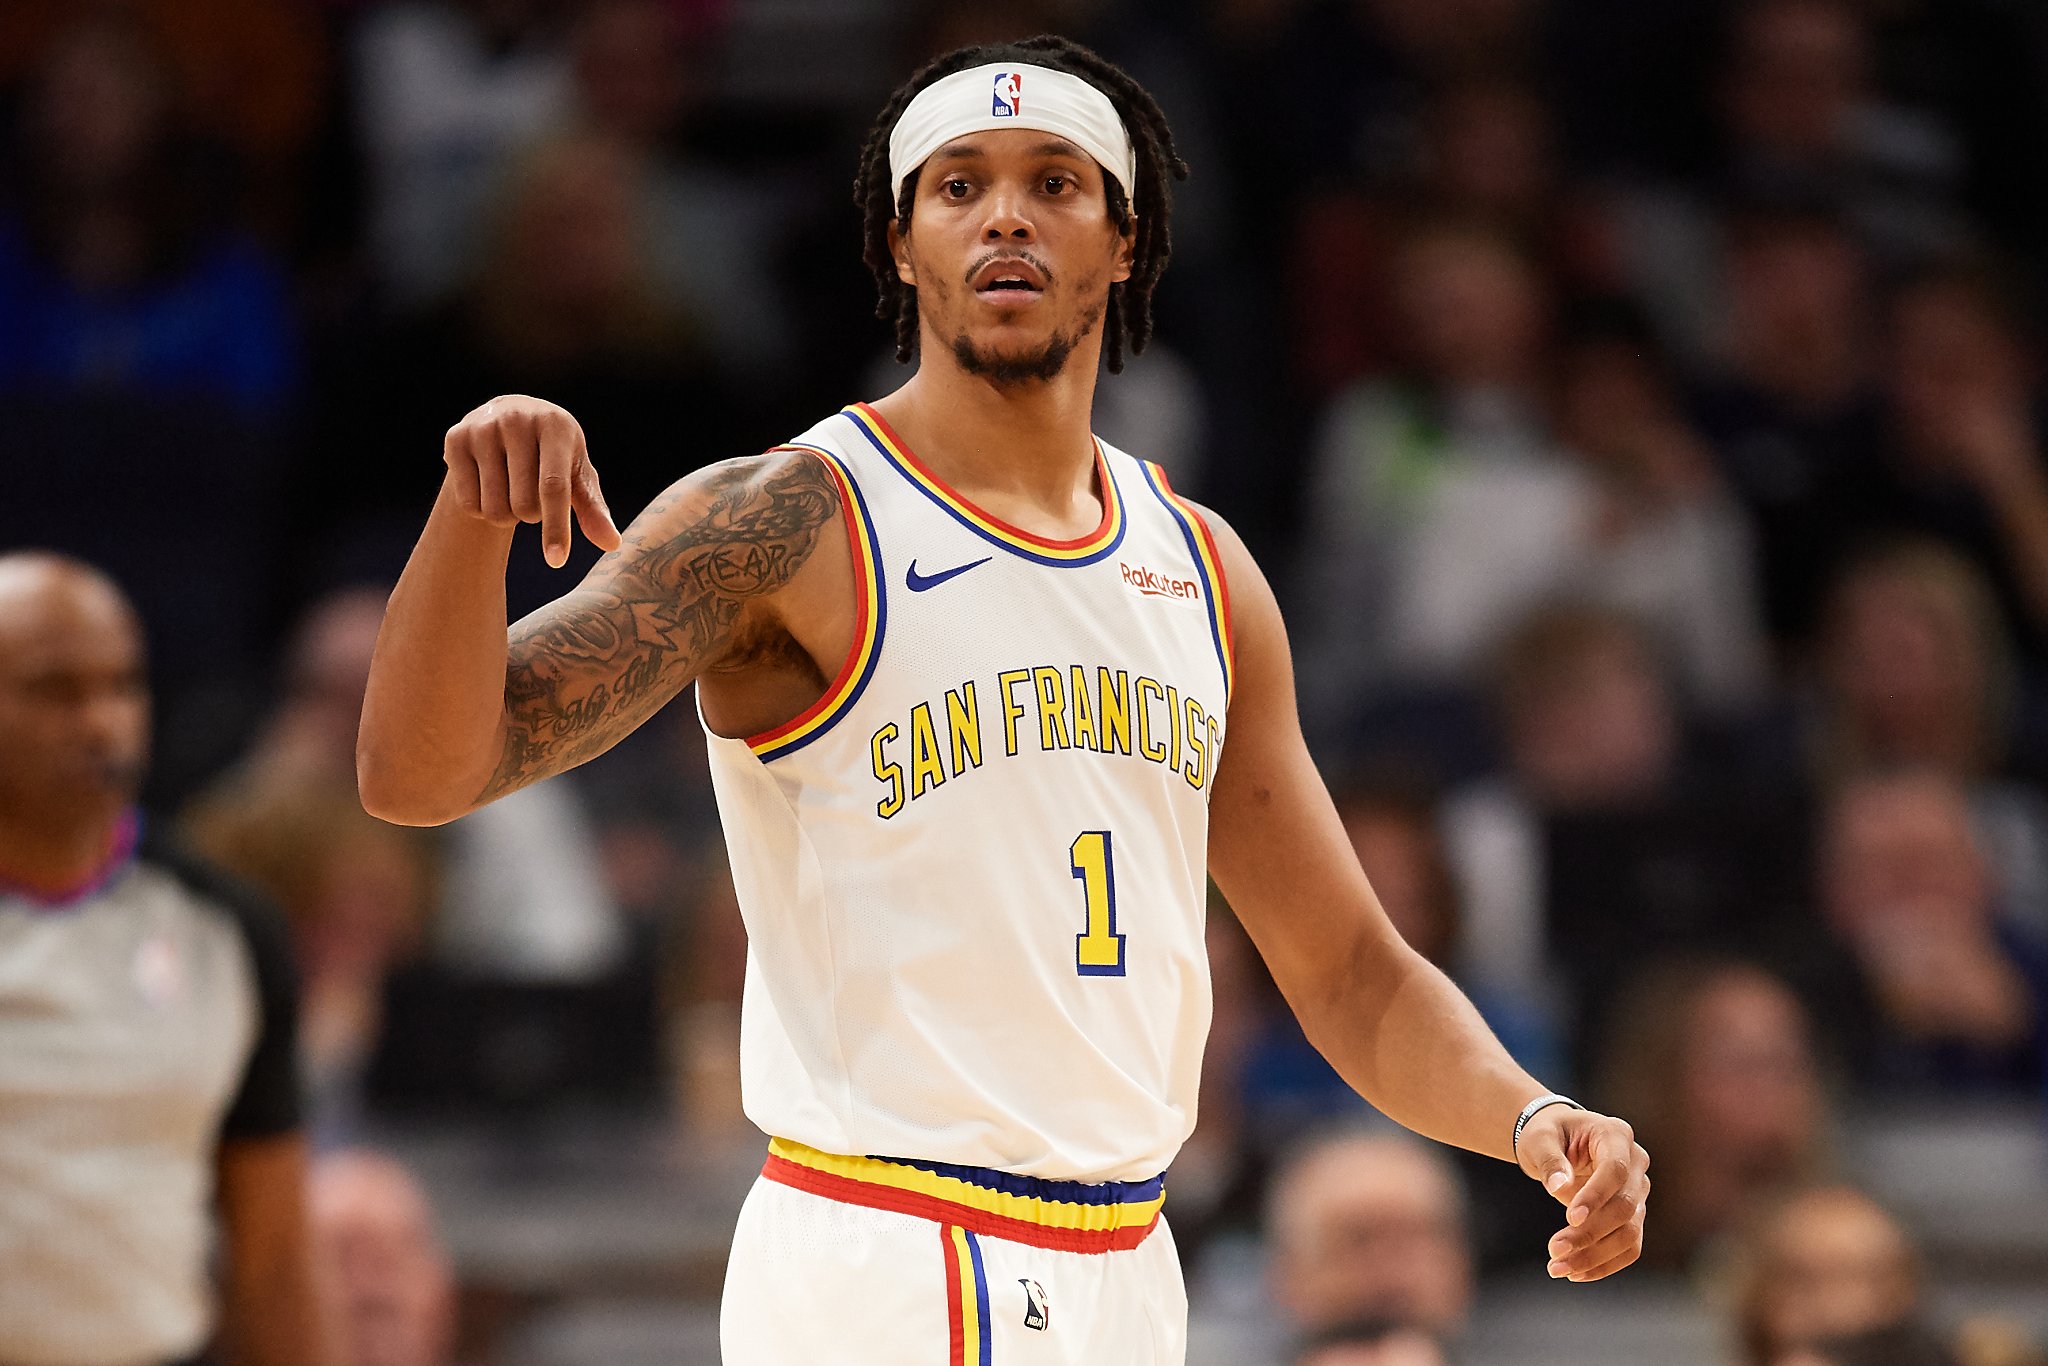 Stein report: Damion Lee is one of the “surest candidates to re